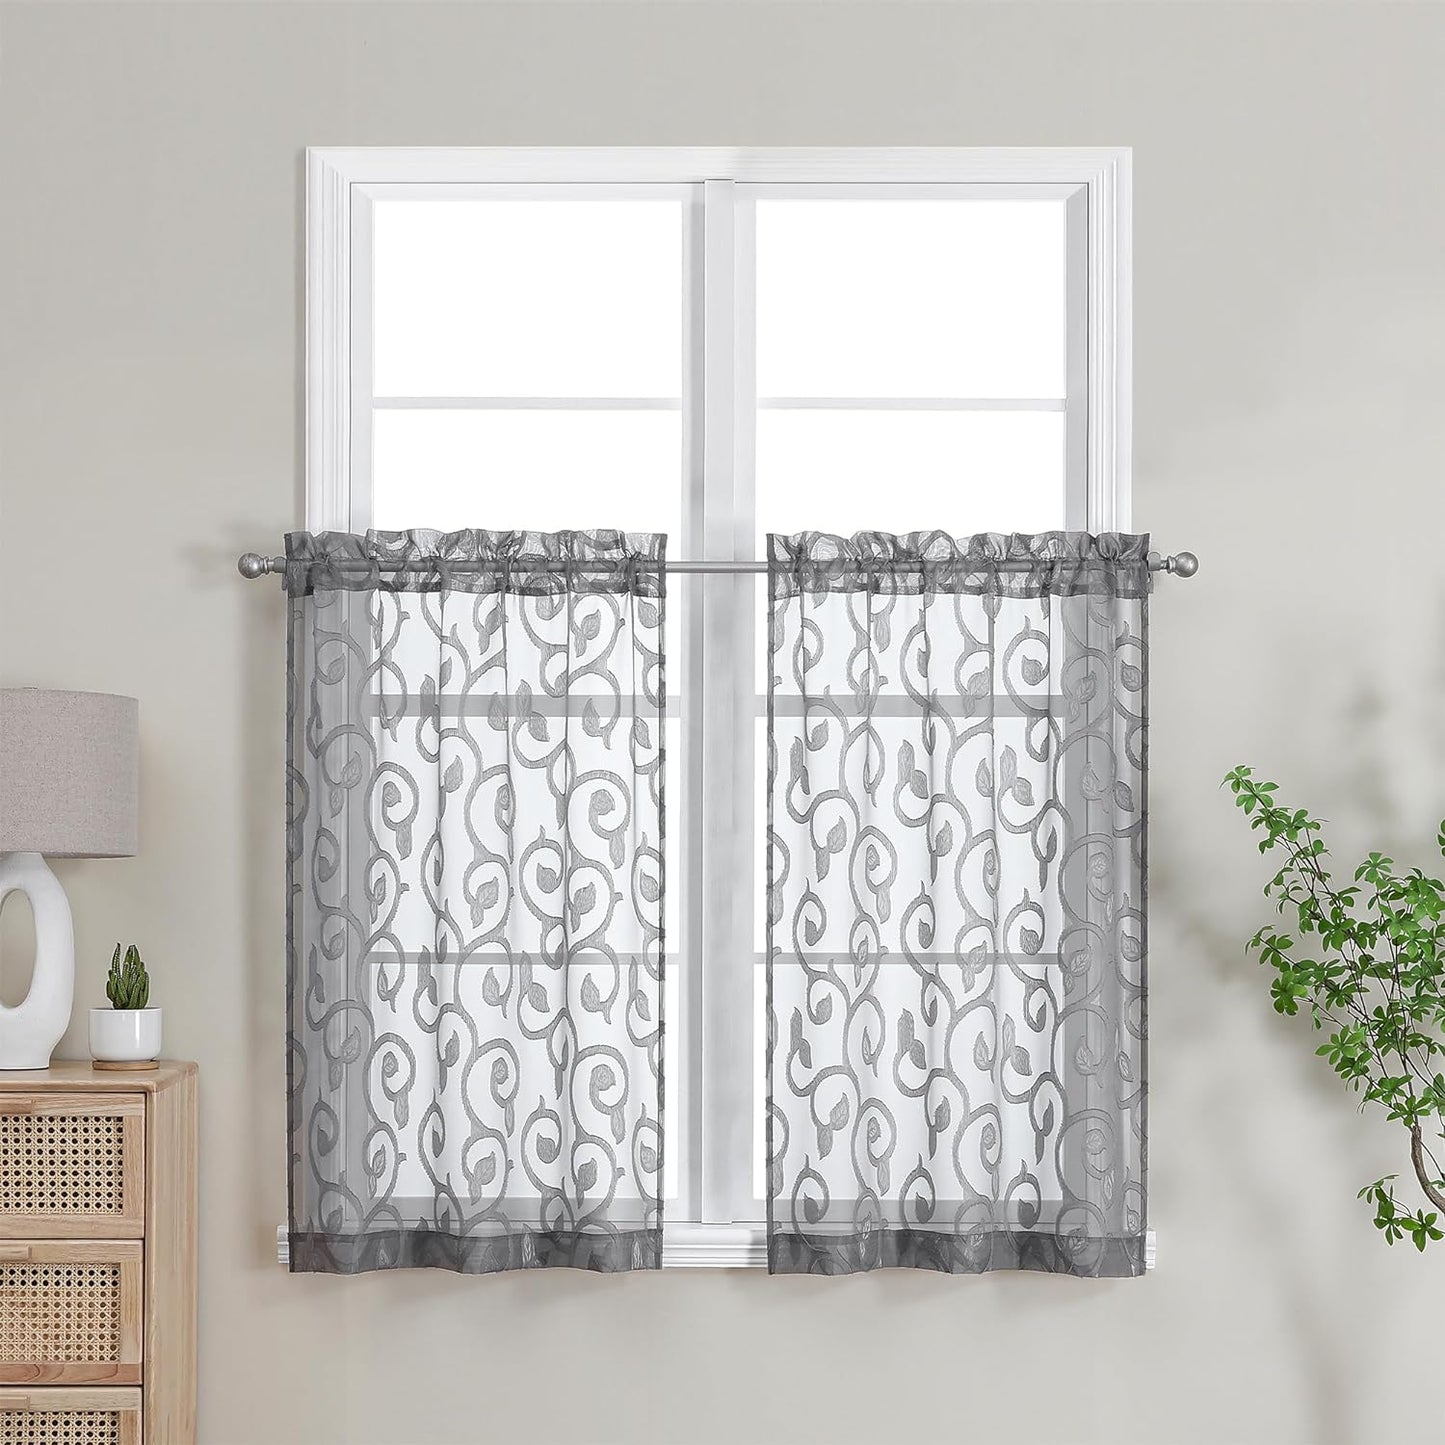 OWENIE Furman Sheer White Curtains 84 Inches Long for Bedroom Living Room 2 Panels Set, White Curtains Jacquard Clip Light Filtering Semi Sheer Curtain Transparent Rod Pocket Window Drapes, 2 Pcs  OWENIE Charcoal Gray 26W X 36L 